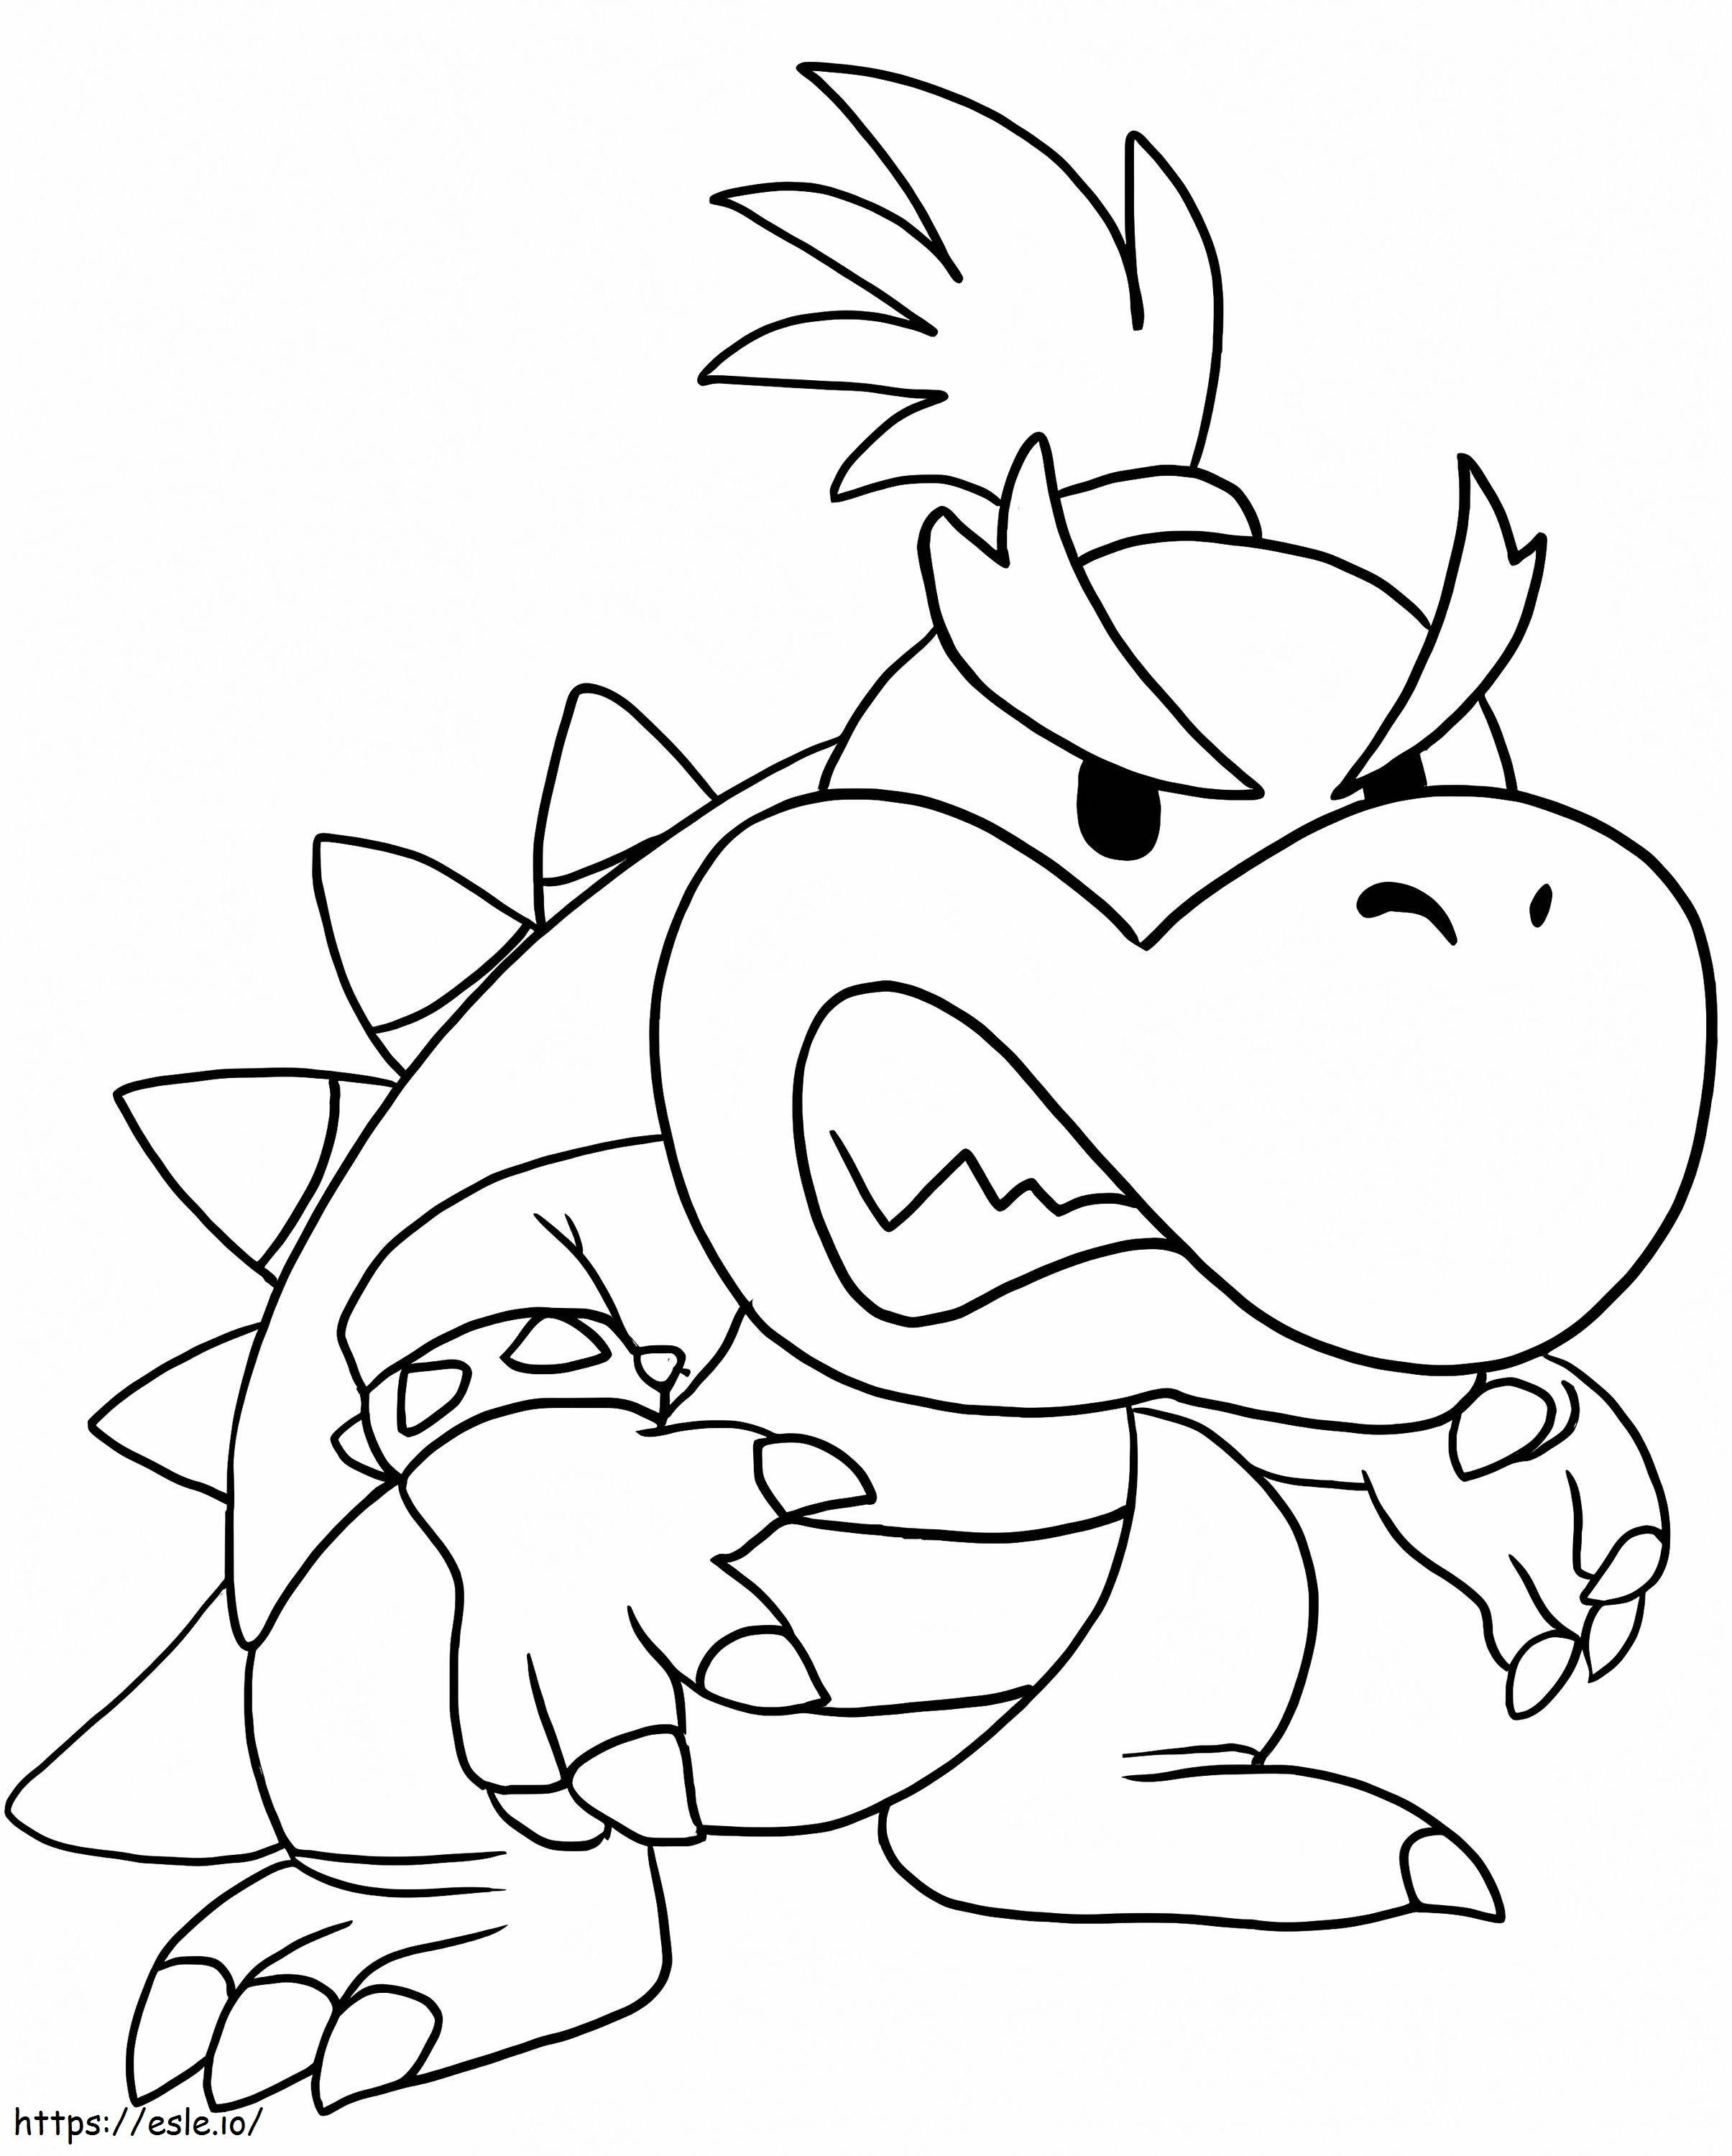 Bowser Jr Angry coloring page